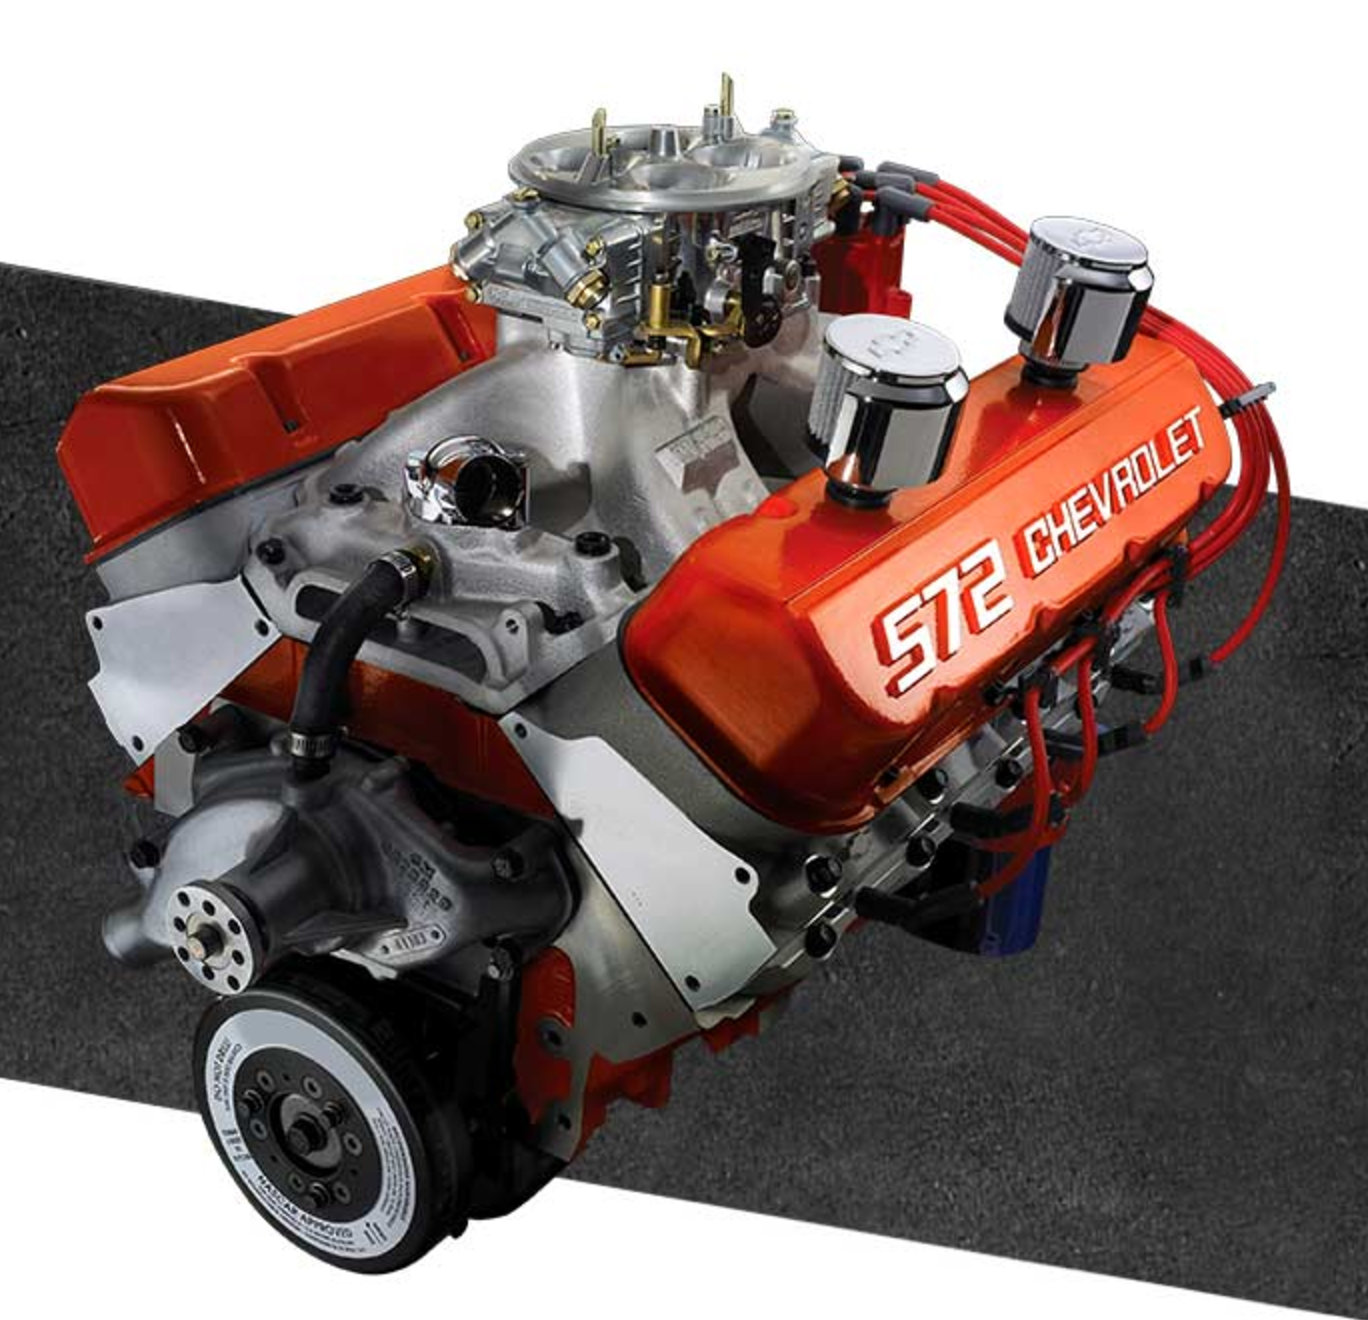 572 Motor: So Many Crate Engines From GM.